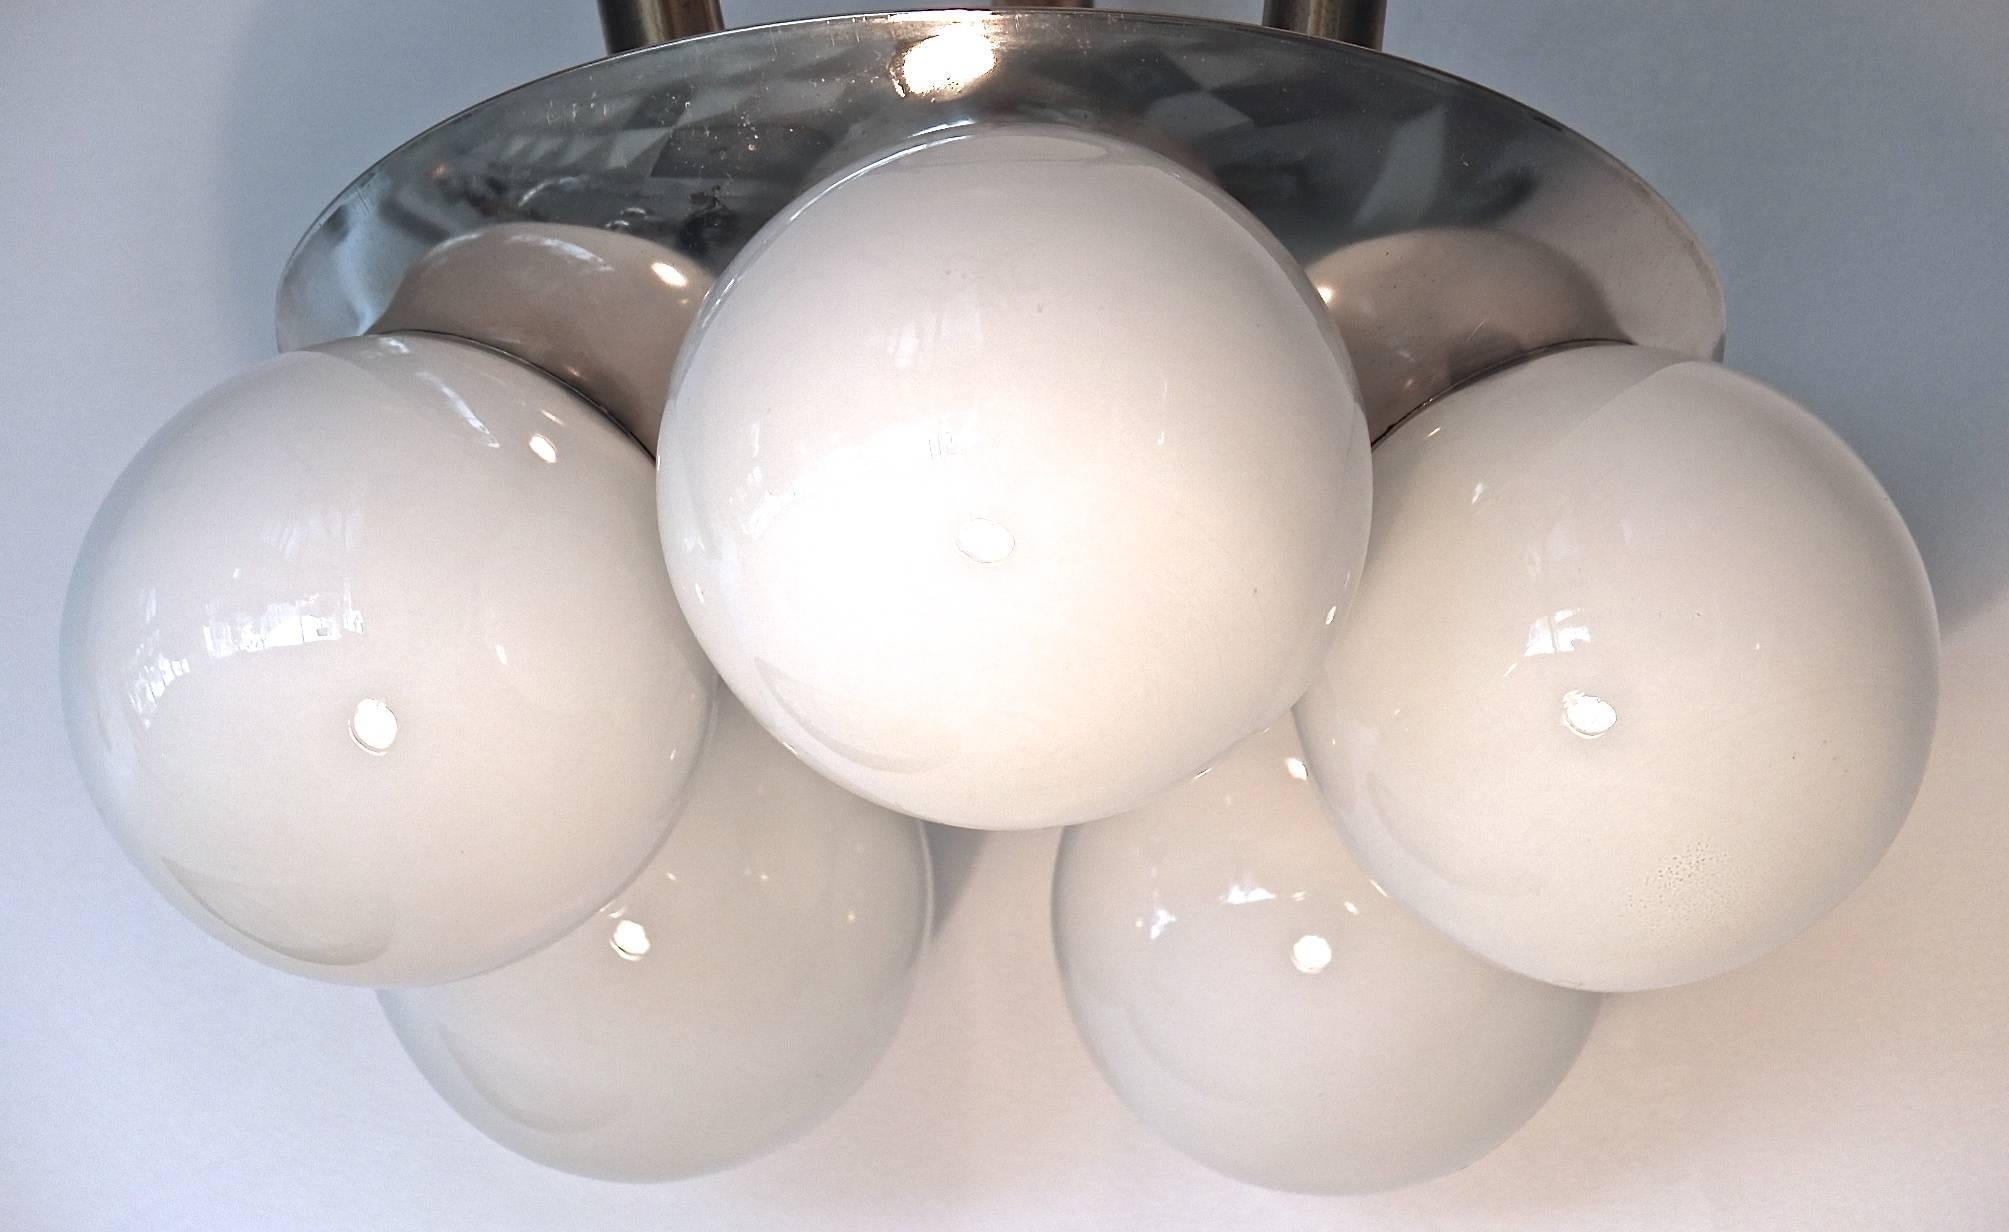 Pair of 1960s flush mounted ceiling lights with chromed dome fixture with five gloss white glass globes each of which are illuminated by a single Edison screw cap bulb up to 60 watts each. Each globe is 5.75